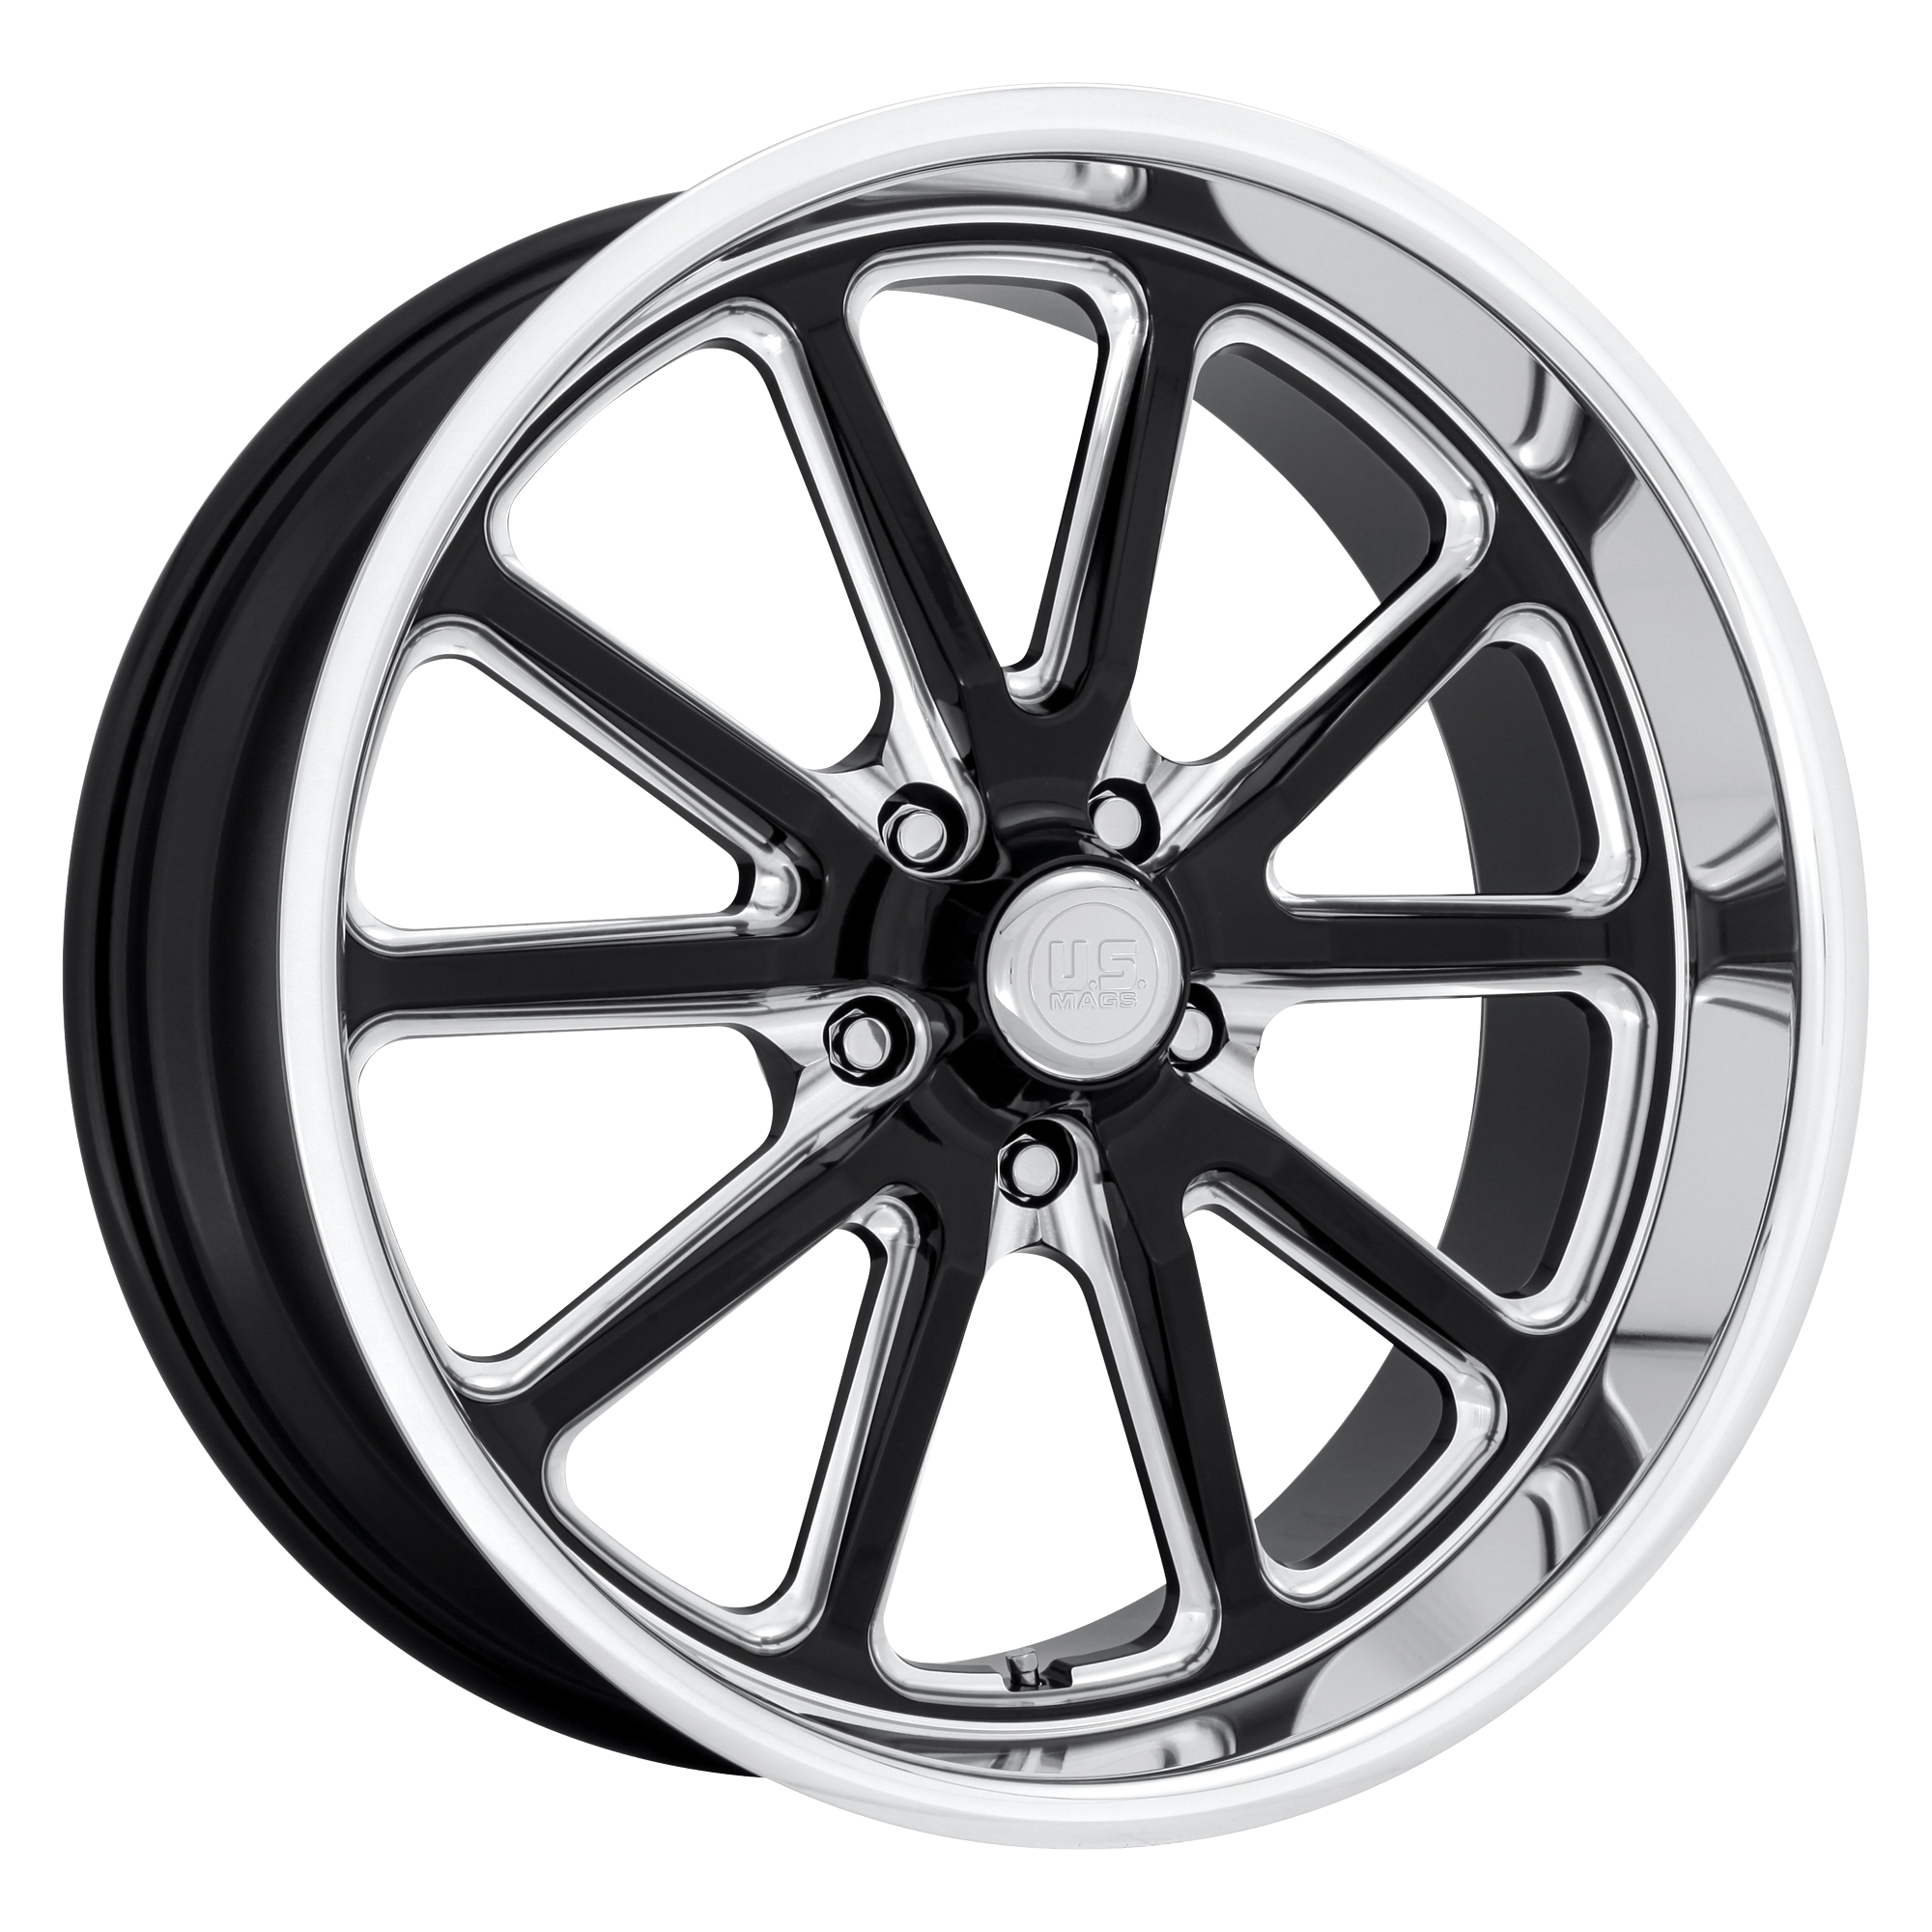 RAMBLER 18x9.5 5x127.00 GLOSS BLACK MILLED (1 mm) - Tires and Engine Performance